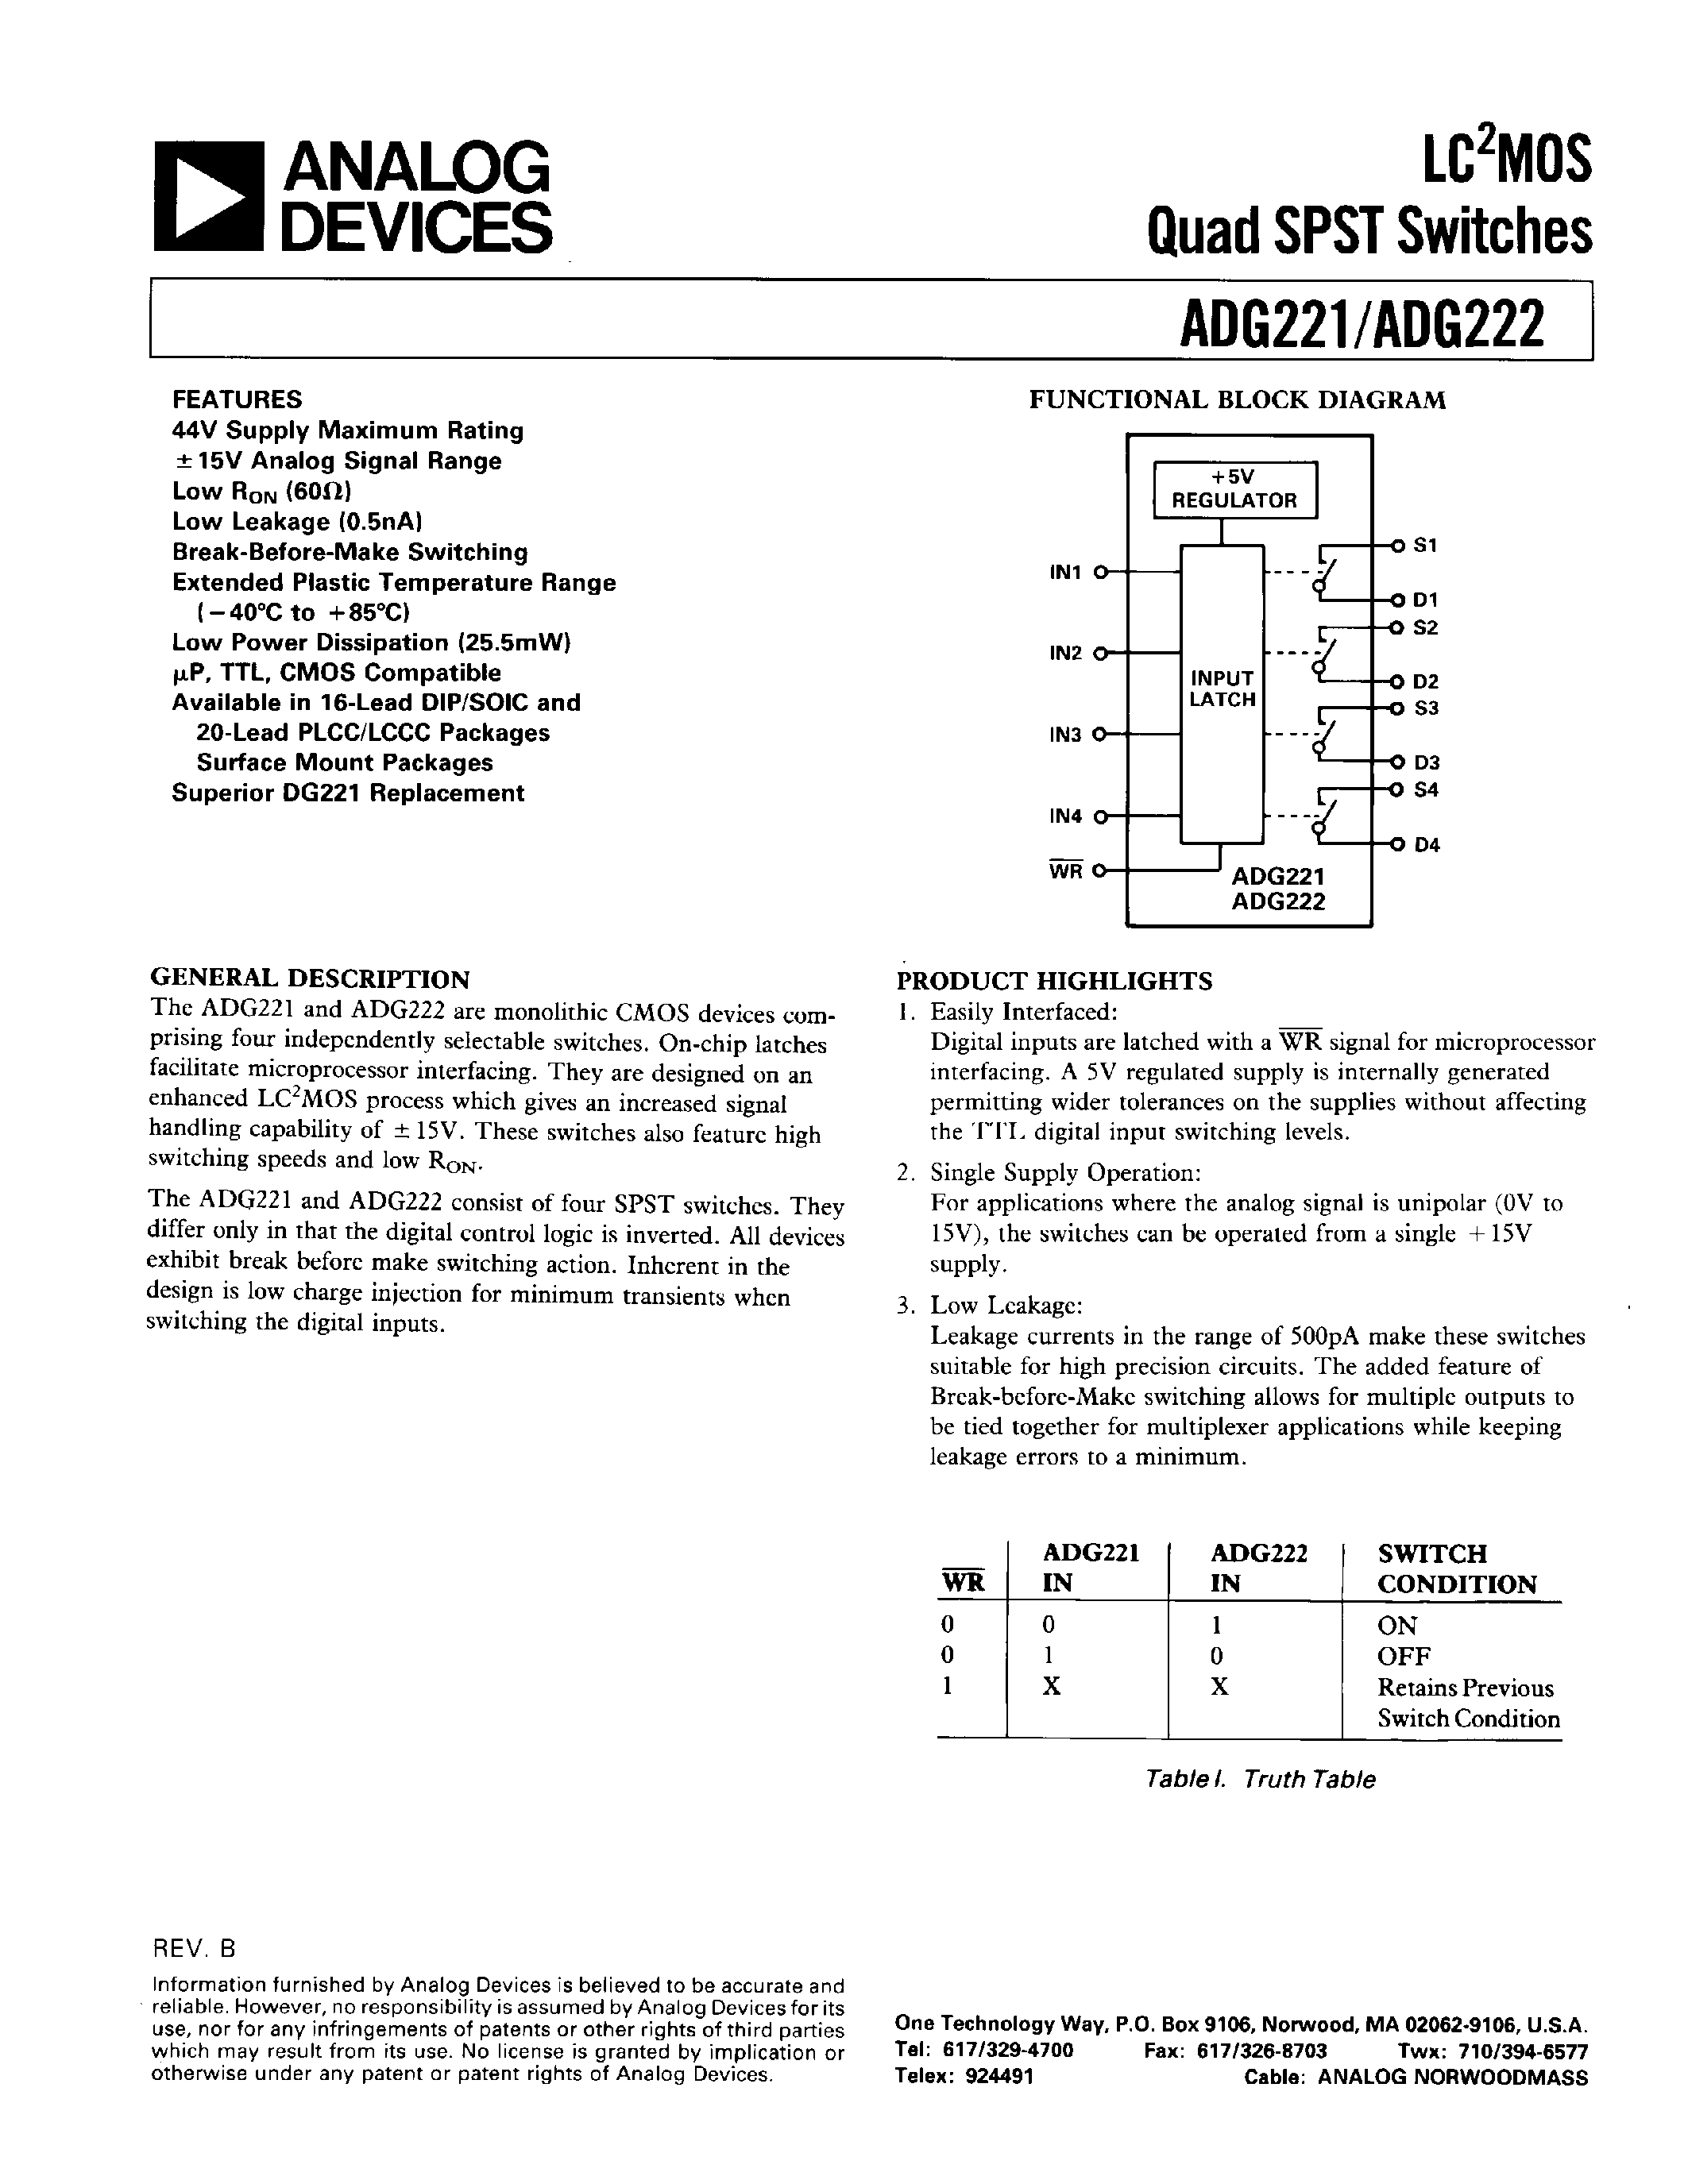 Datasheet ADG221KN - LC2MOS QUAD SPST SWITCHES page 1